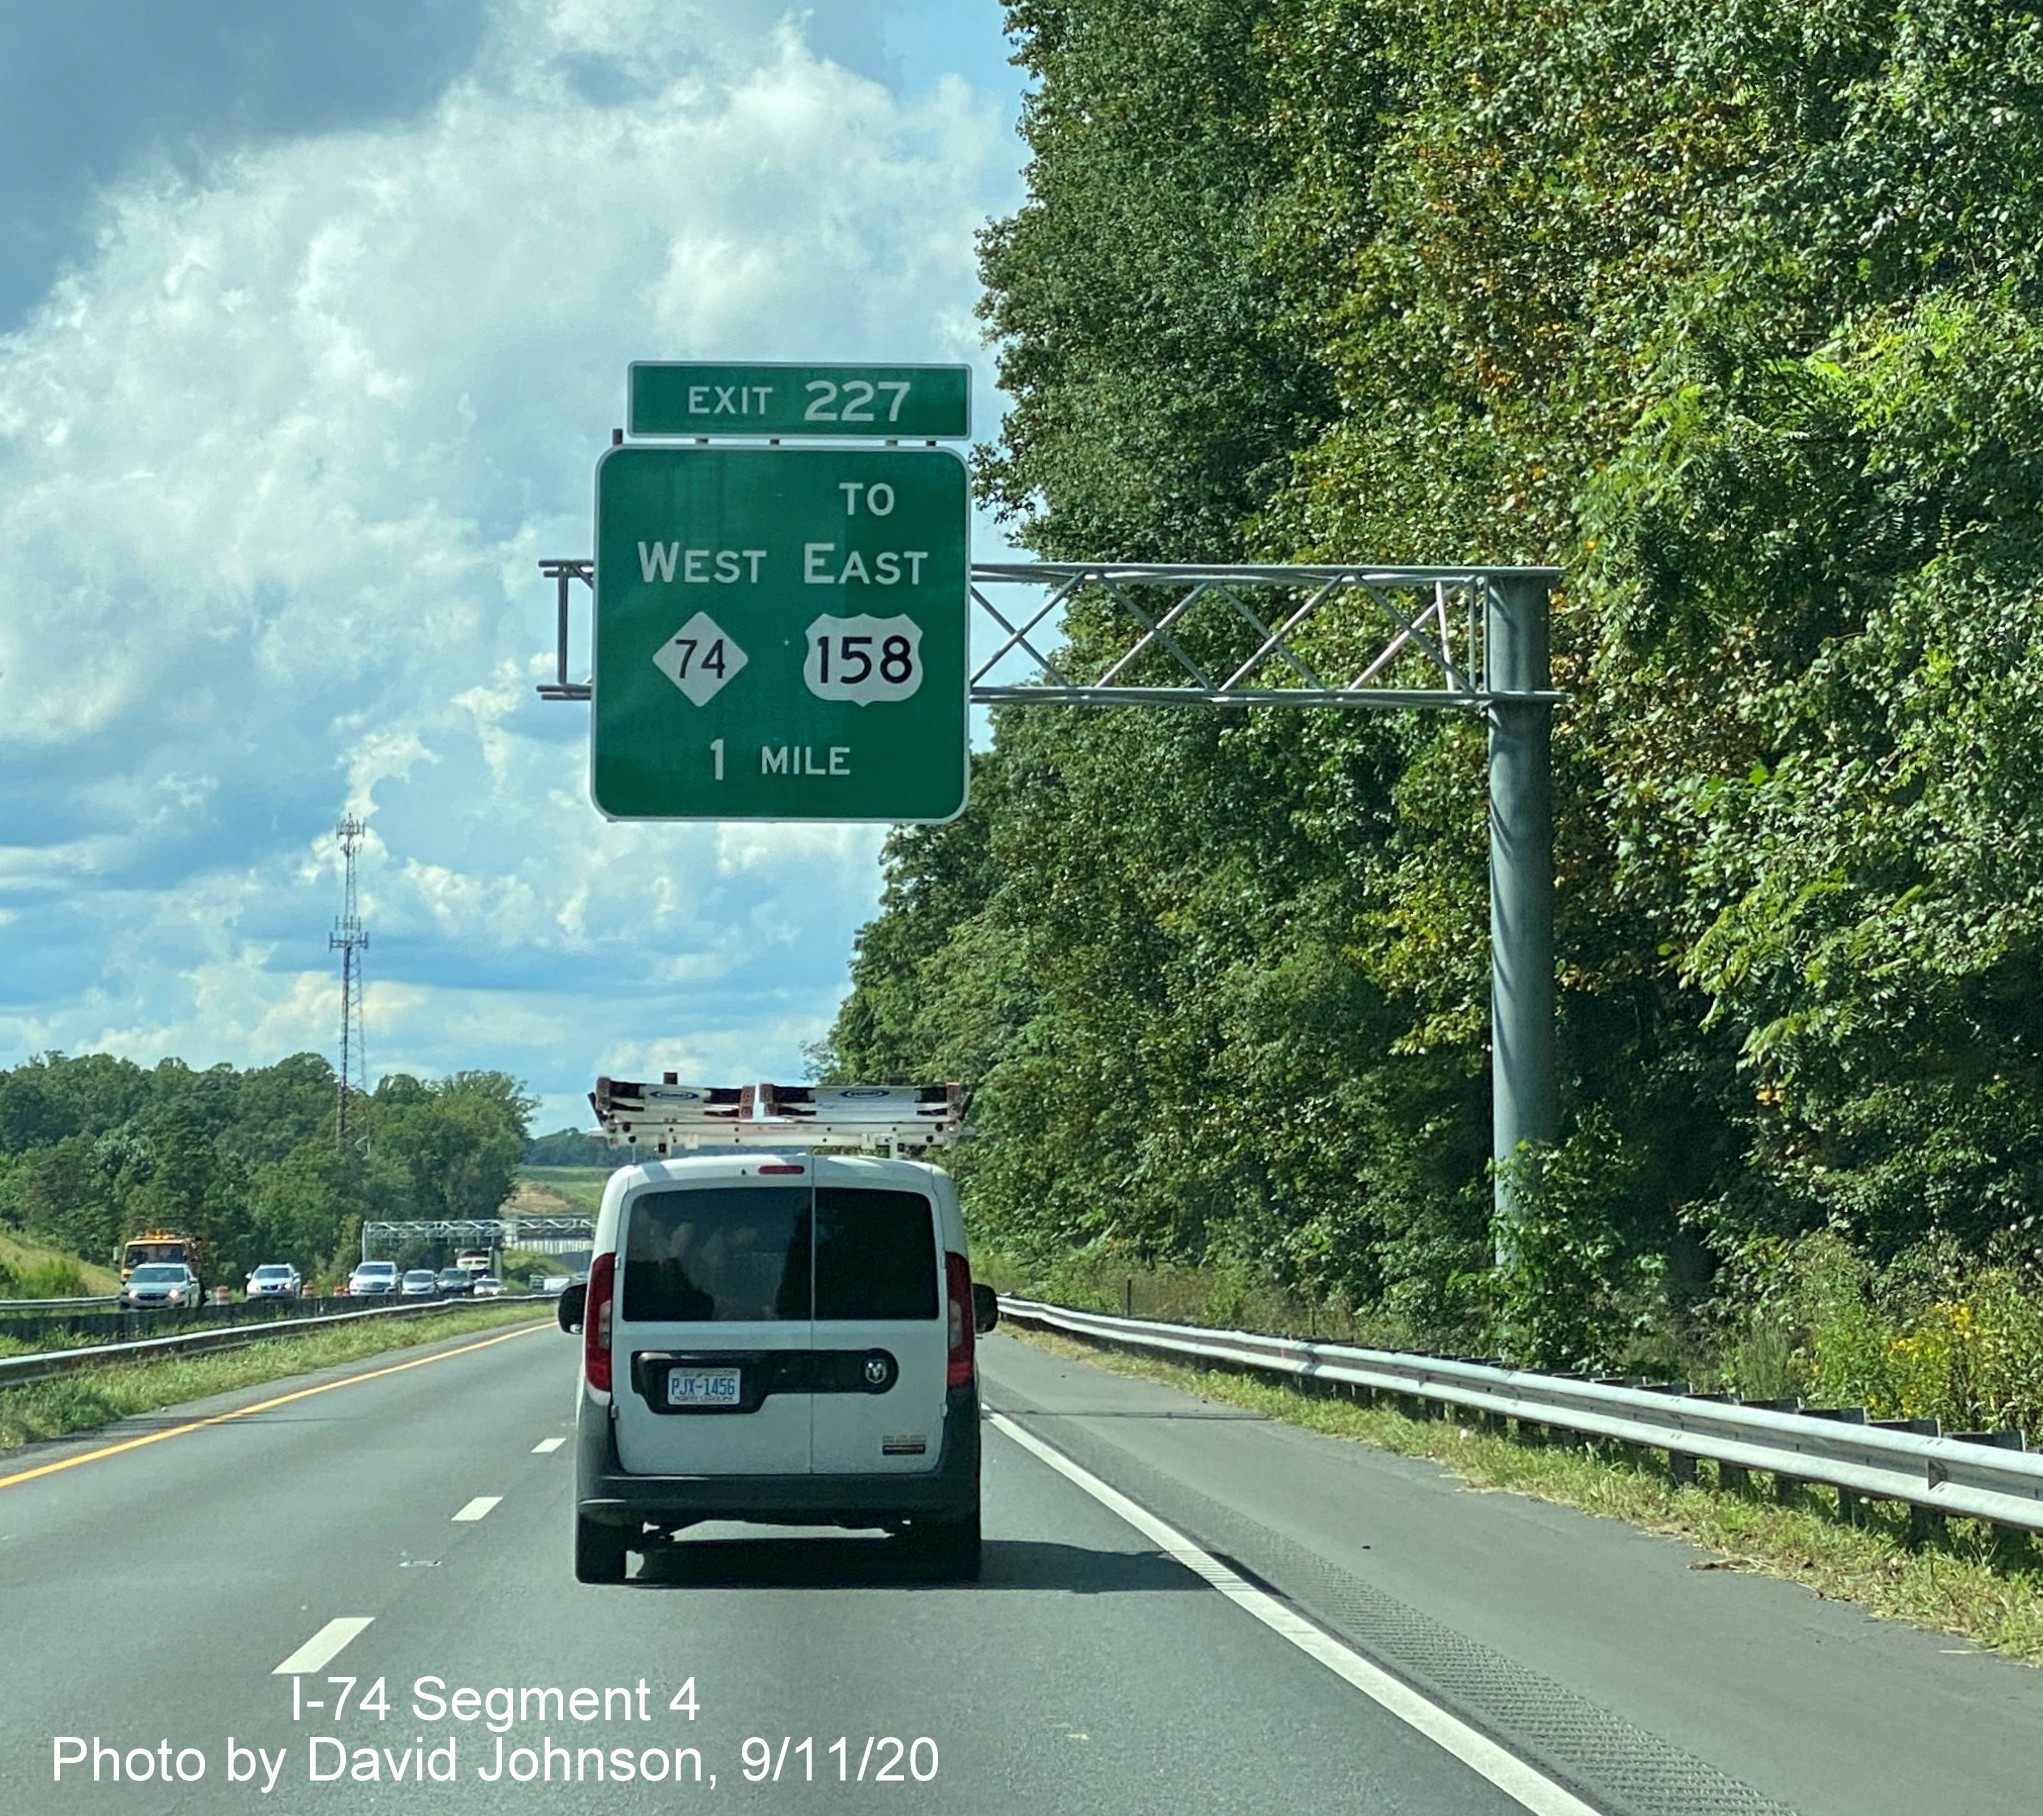 Image of newly uncovered 1-mile advance overhead sign for NC 74 West Winston Salem Northern Beltway on US 421 North Salem Parkway, by David Johnson September 2020